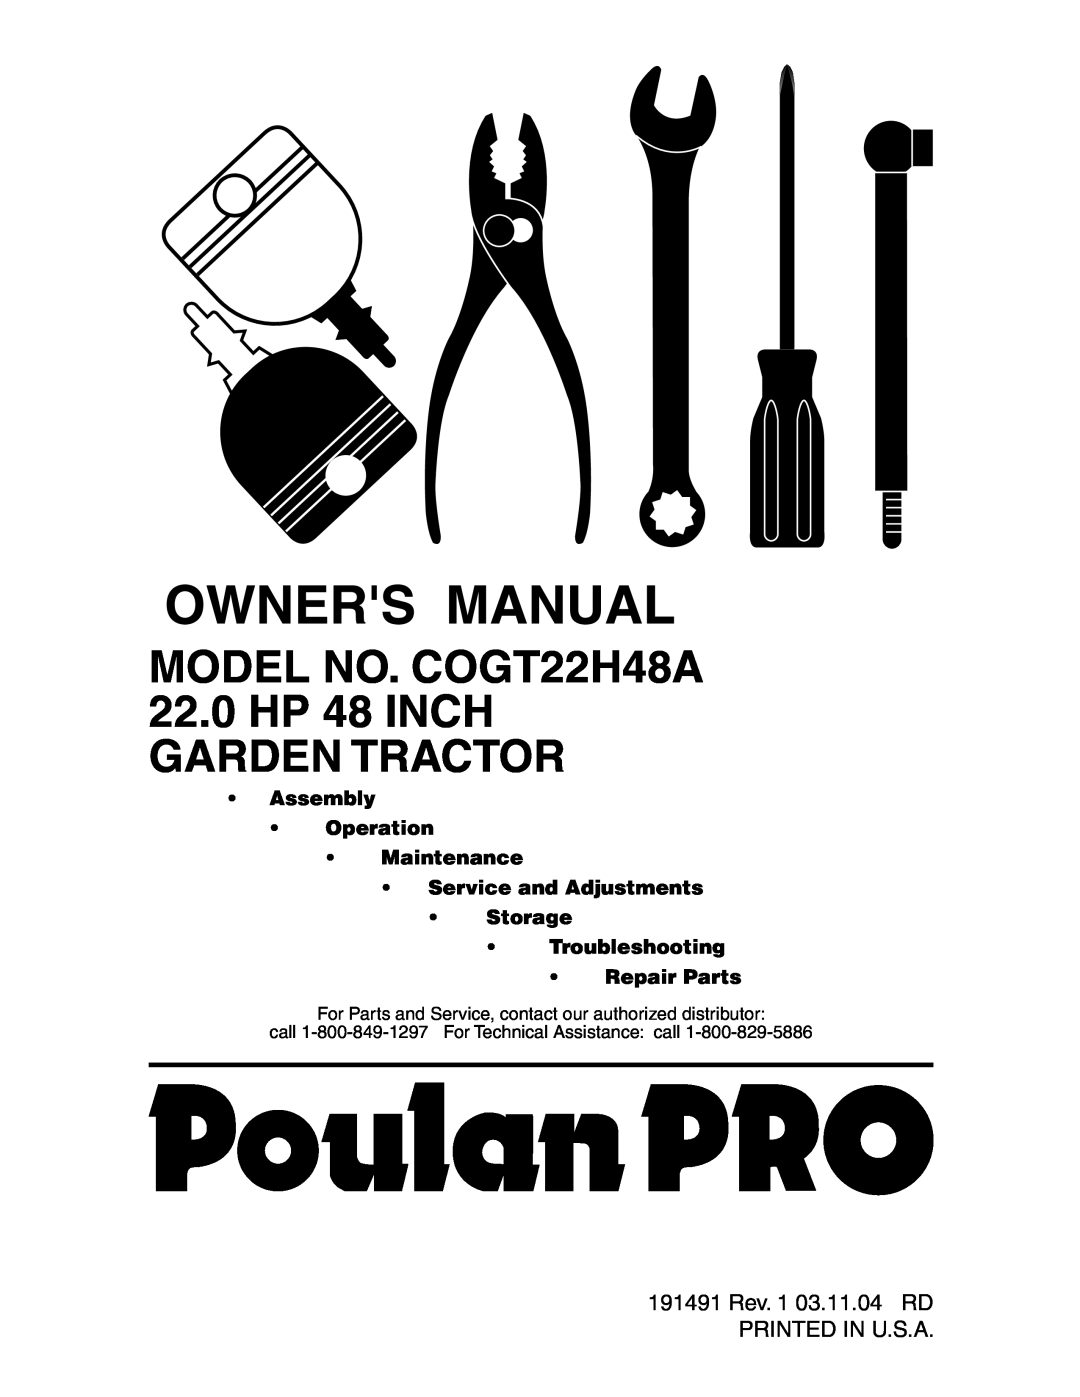 Poulan manual MODEL NO. COGT22H48A, 22.0 HP 48 INCH GARDEN TRACTOR, Troubleshooting Repair Parts 